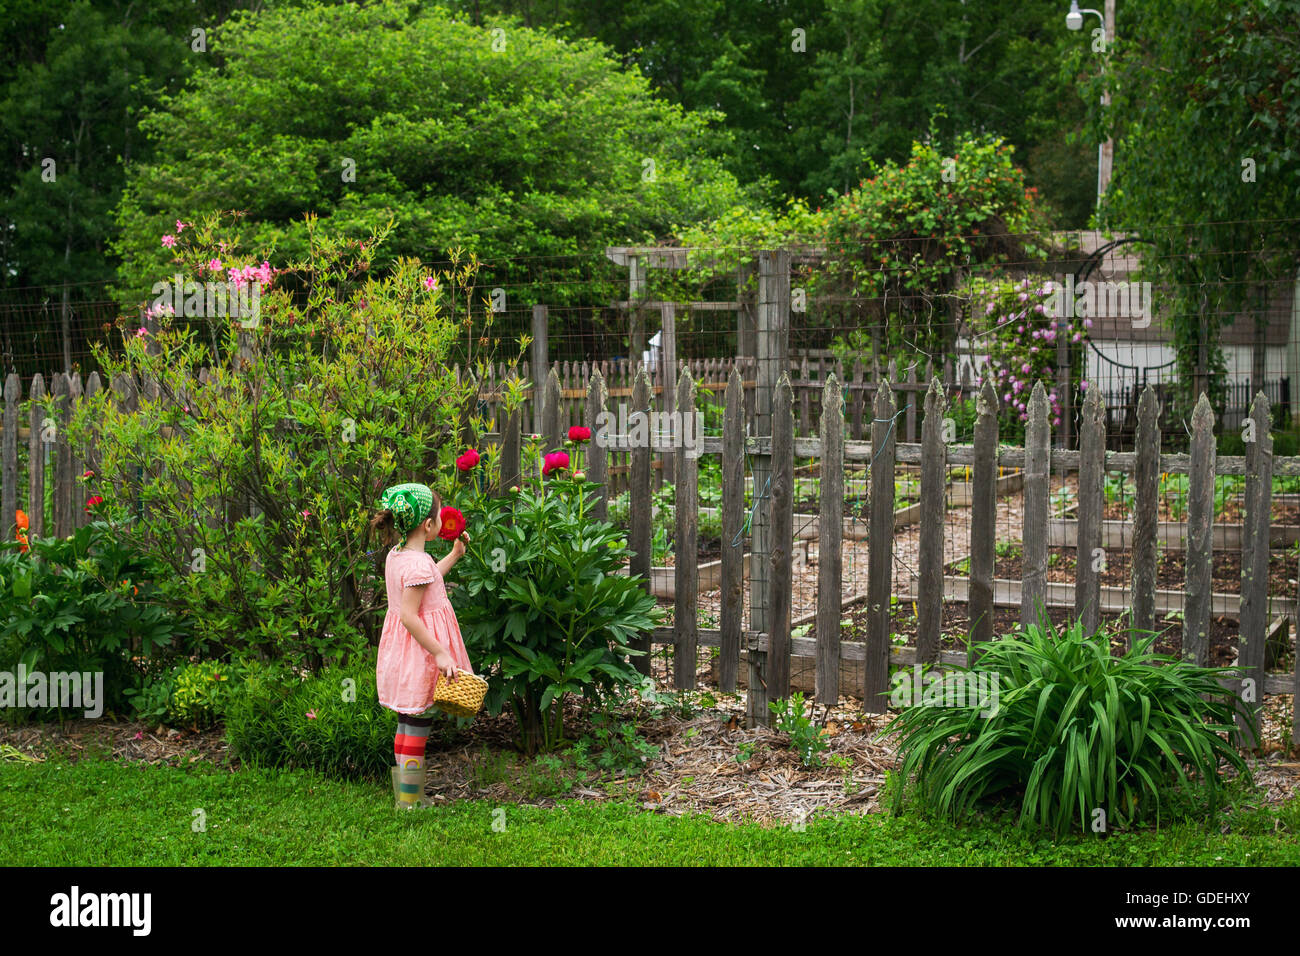 Girl smelling a flower by vegetable garden Stock Photo